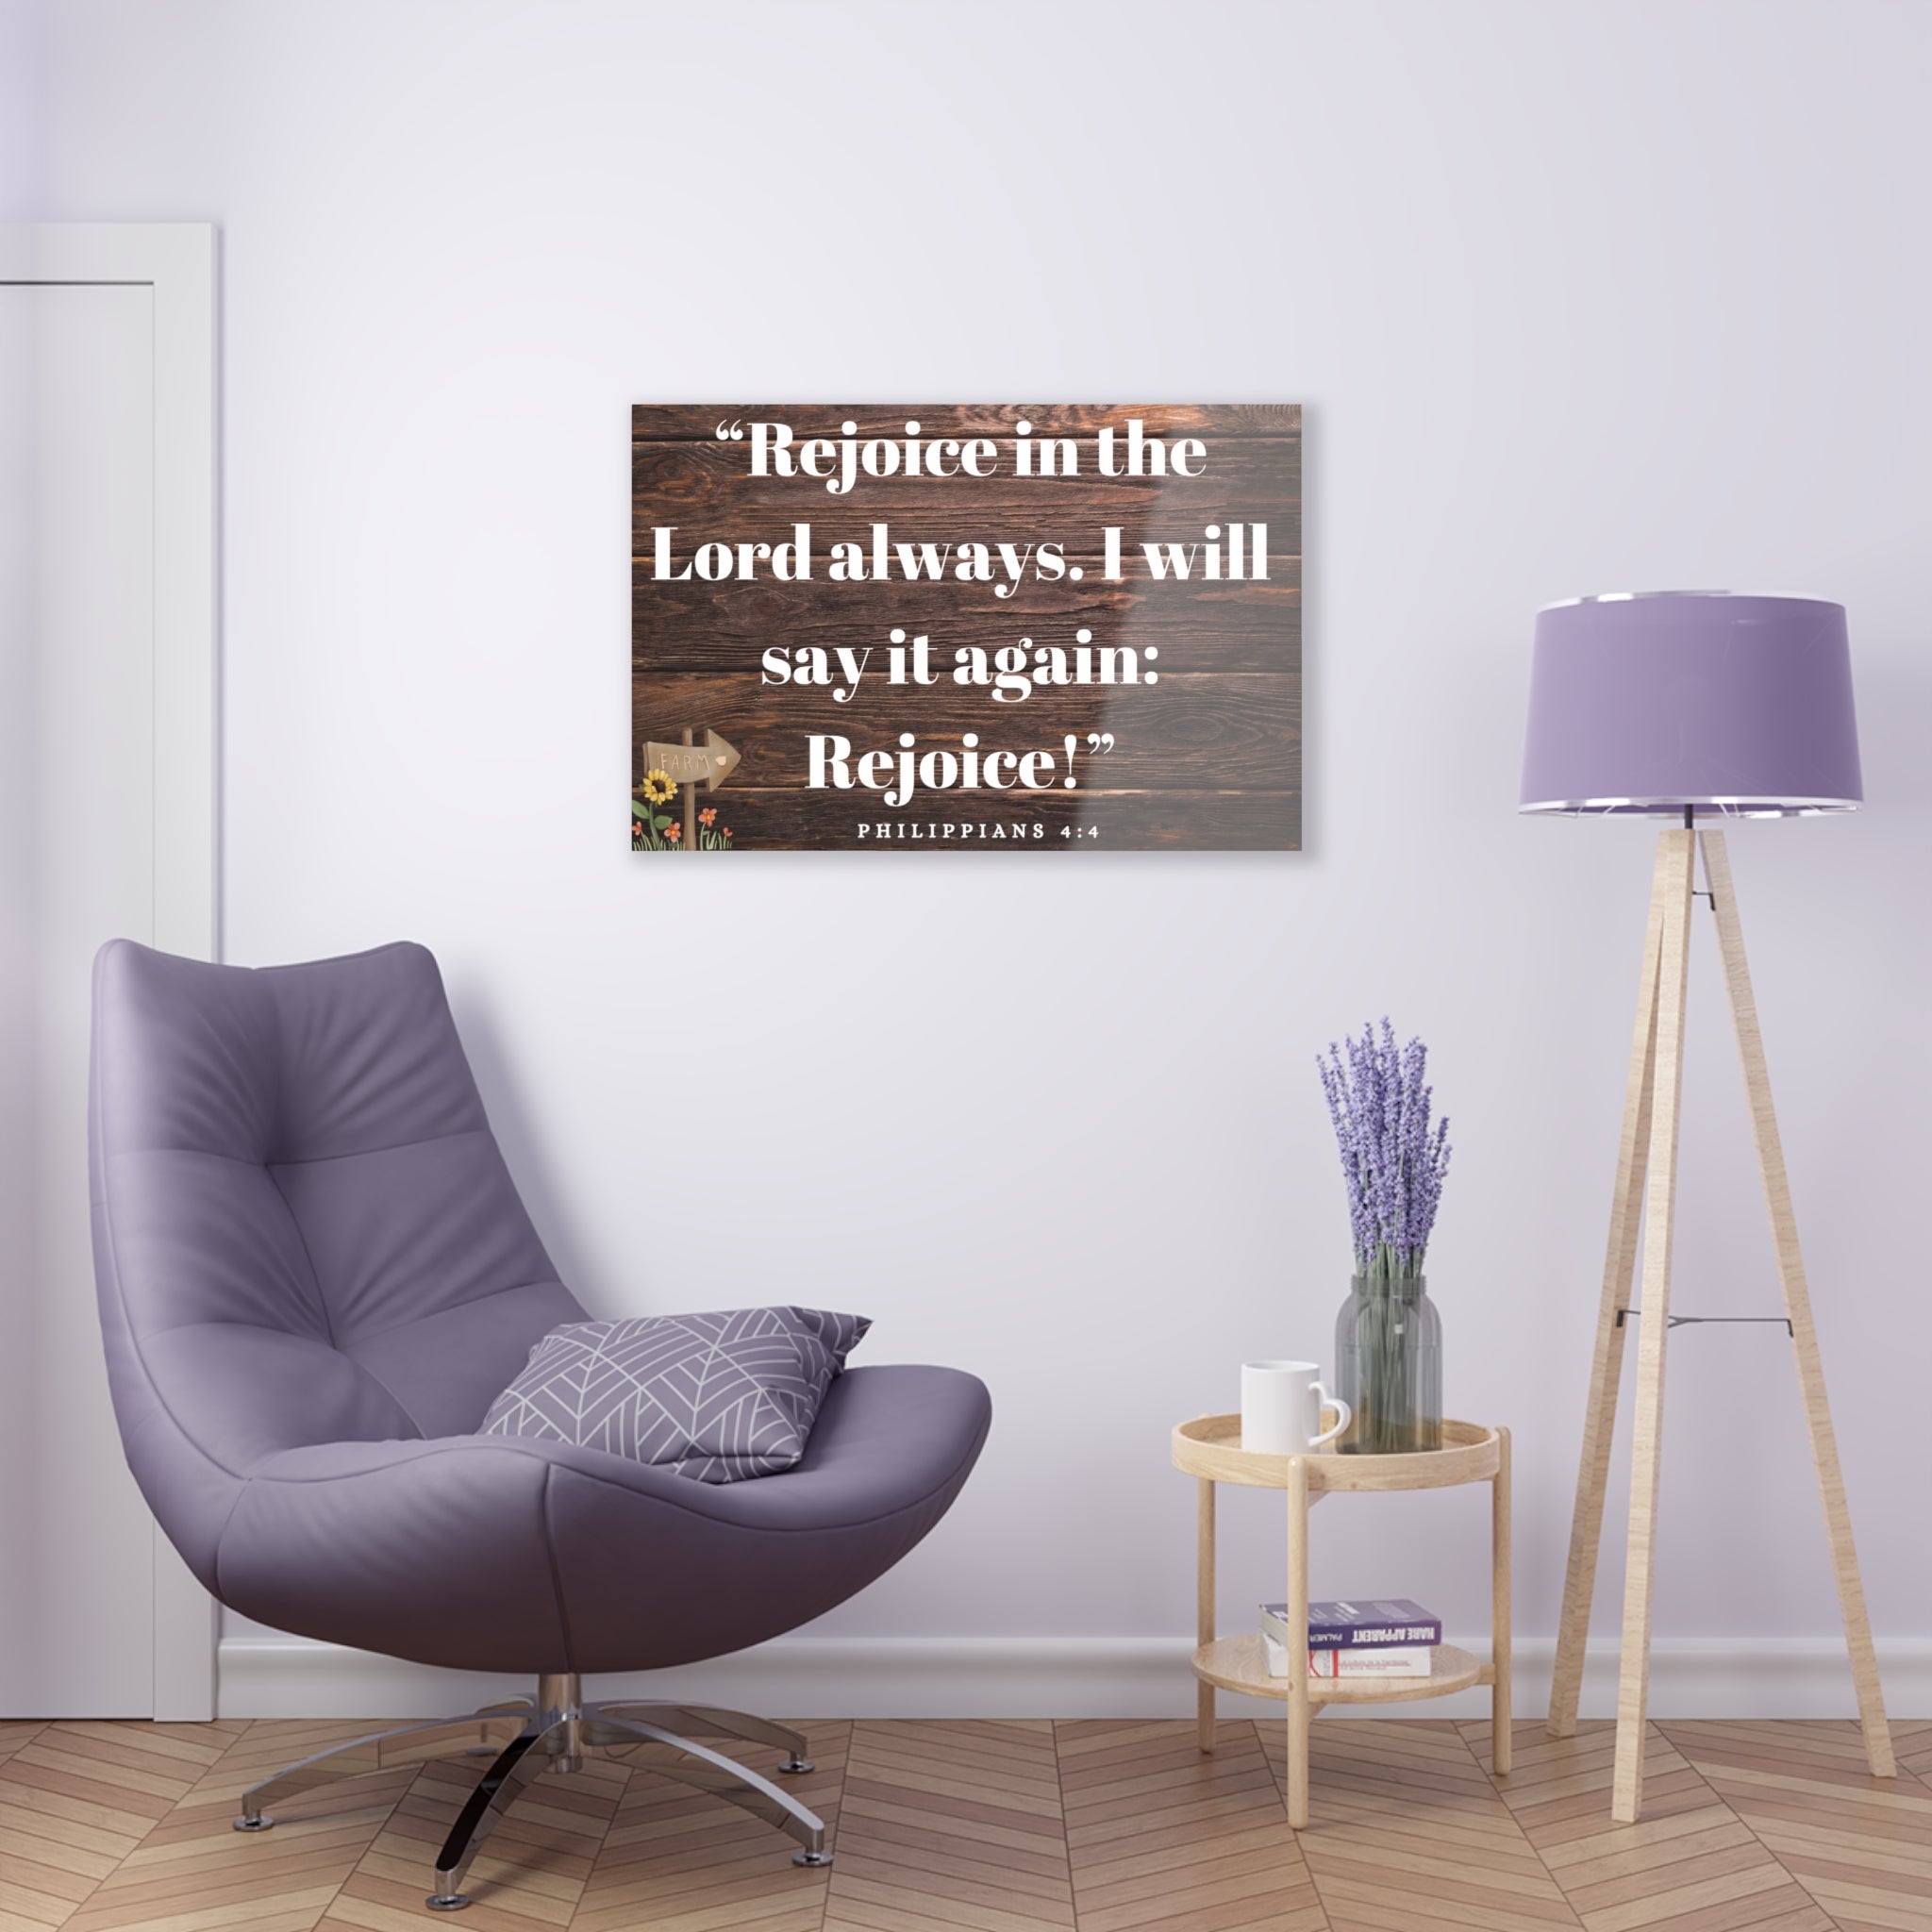 Farm House Wall Decor - Acrylic Print with Inspirational Scripture | Art & Wall Decor,Assembled in the USA,Assembled in USA,Decor,Home & Living,Home Decor,Indoor,Made in the USA,Made in USA,Poster